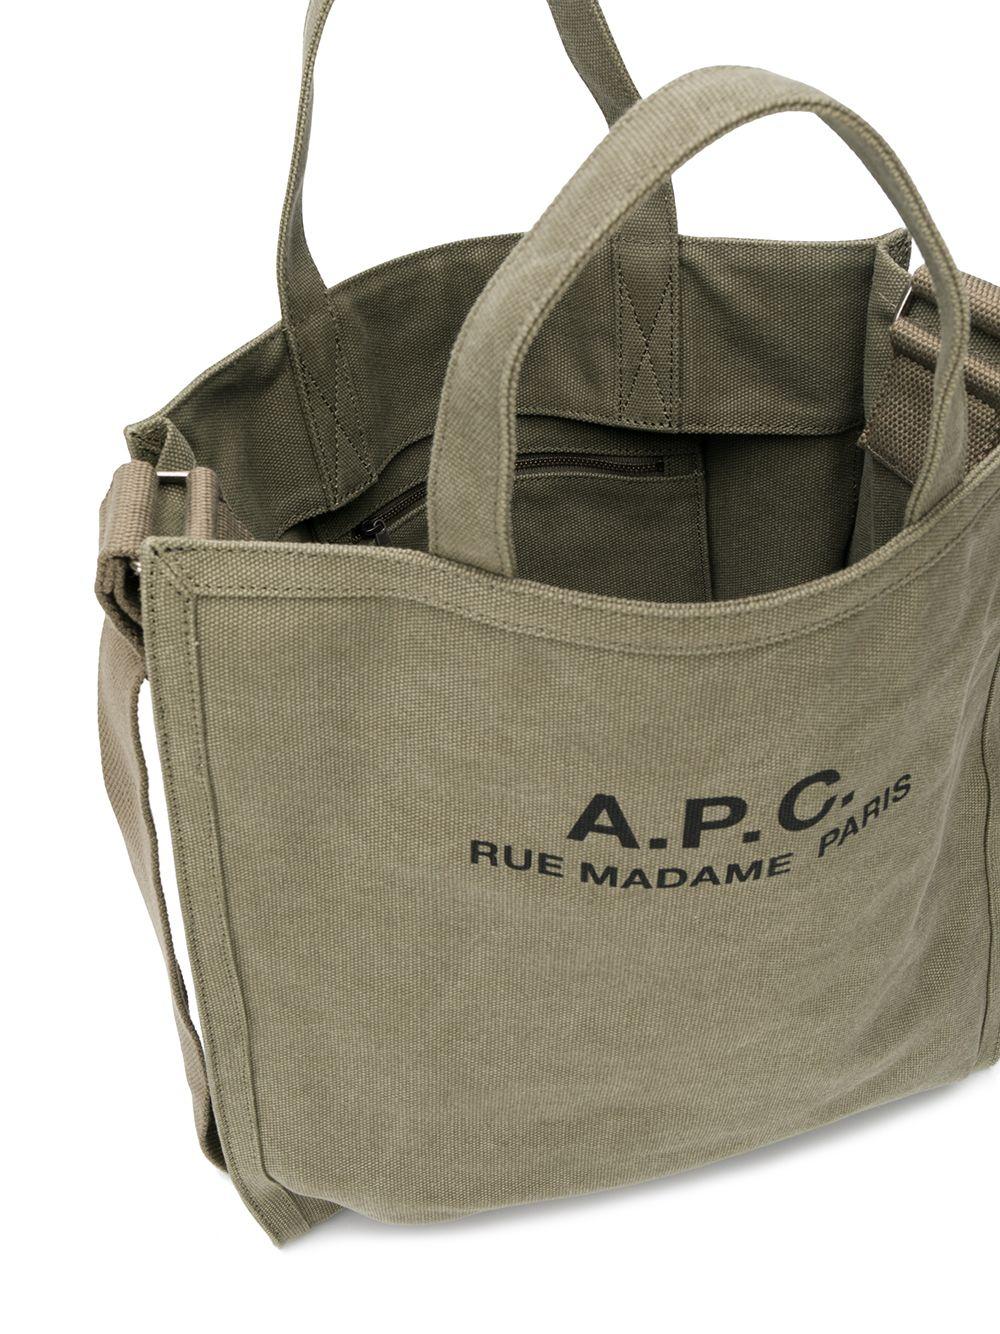 A.P.C - Tote bag for Man - Green - PUAATH61863-KAW